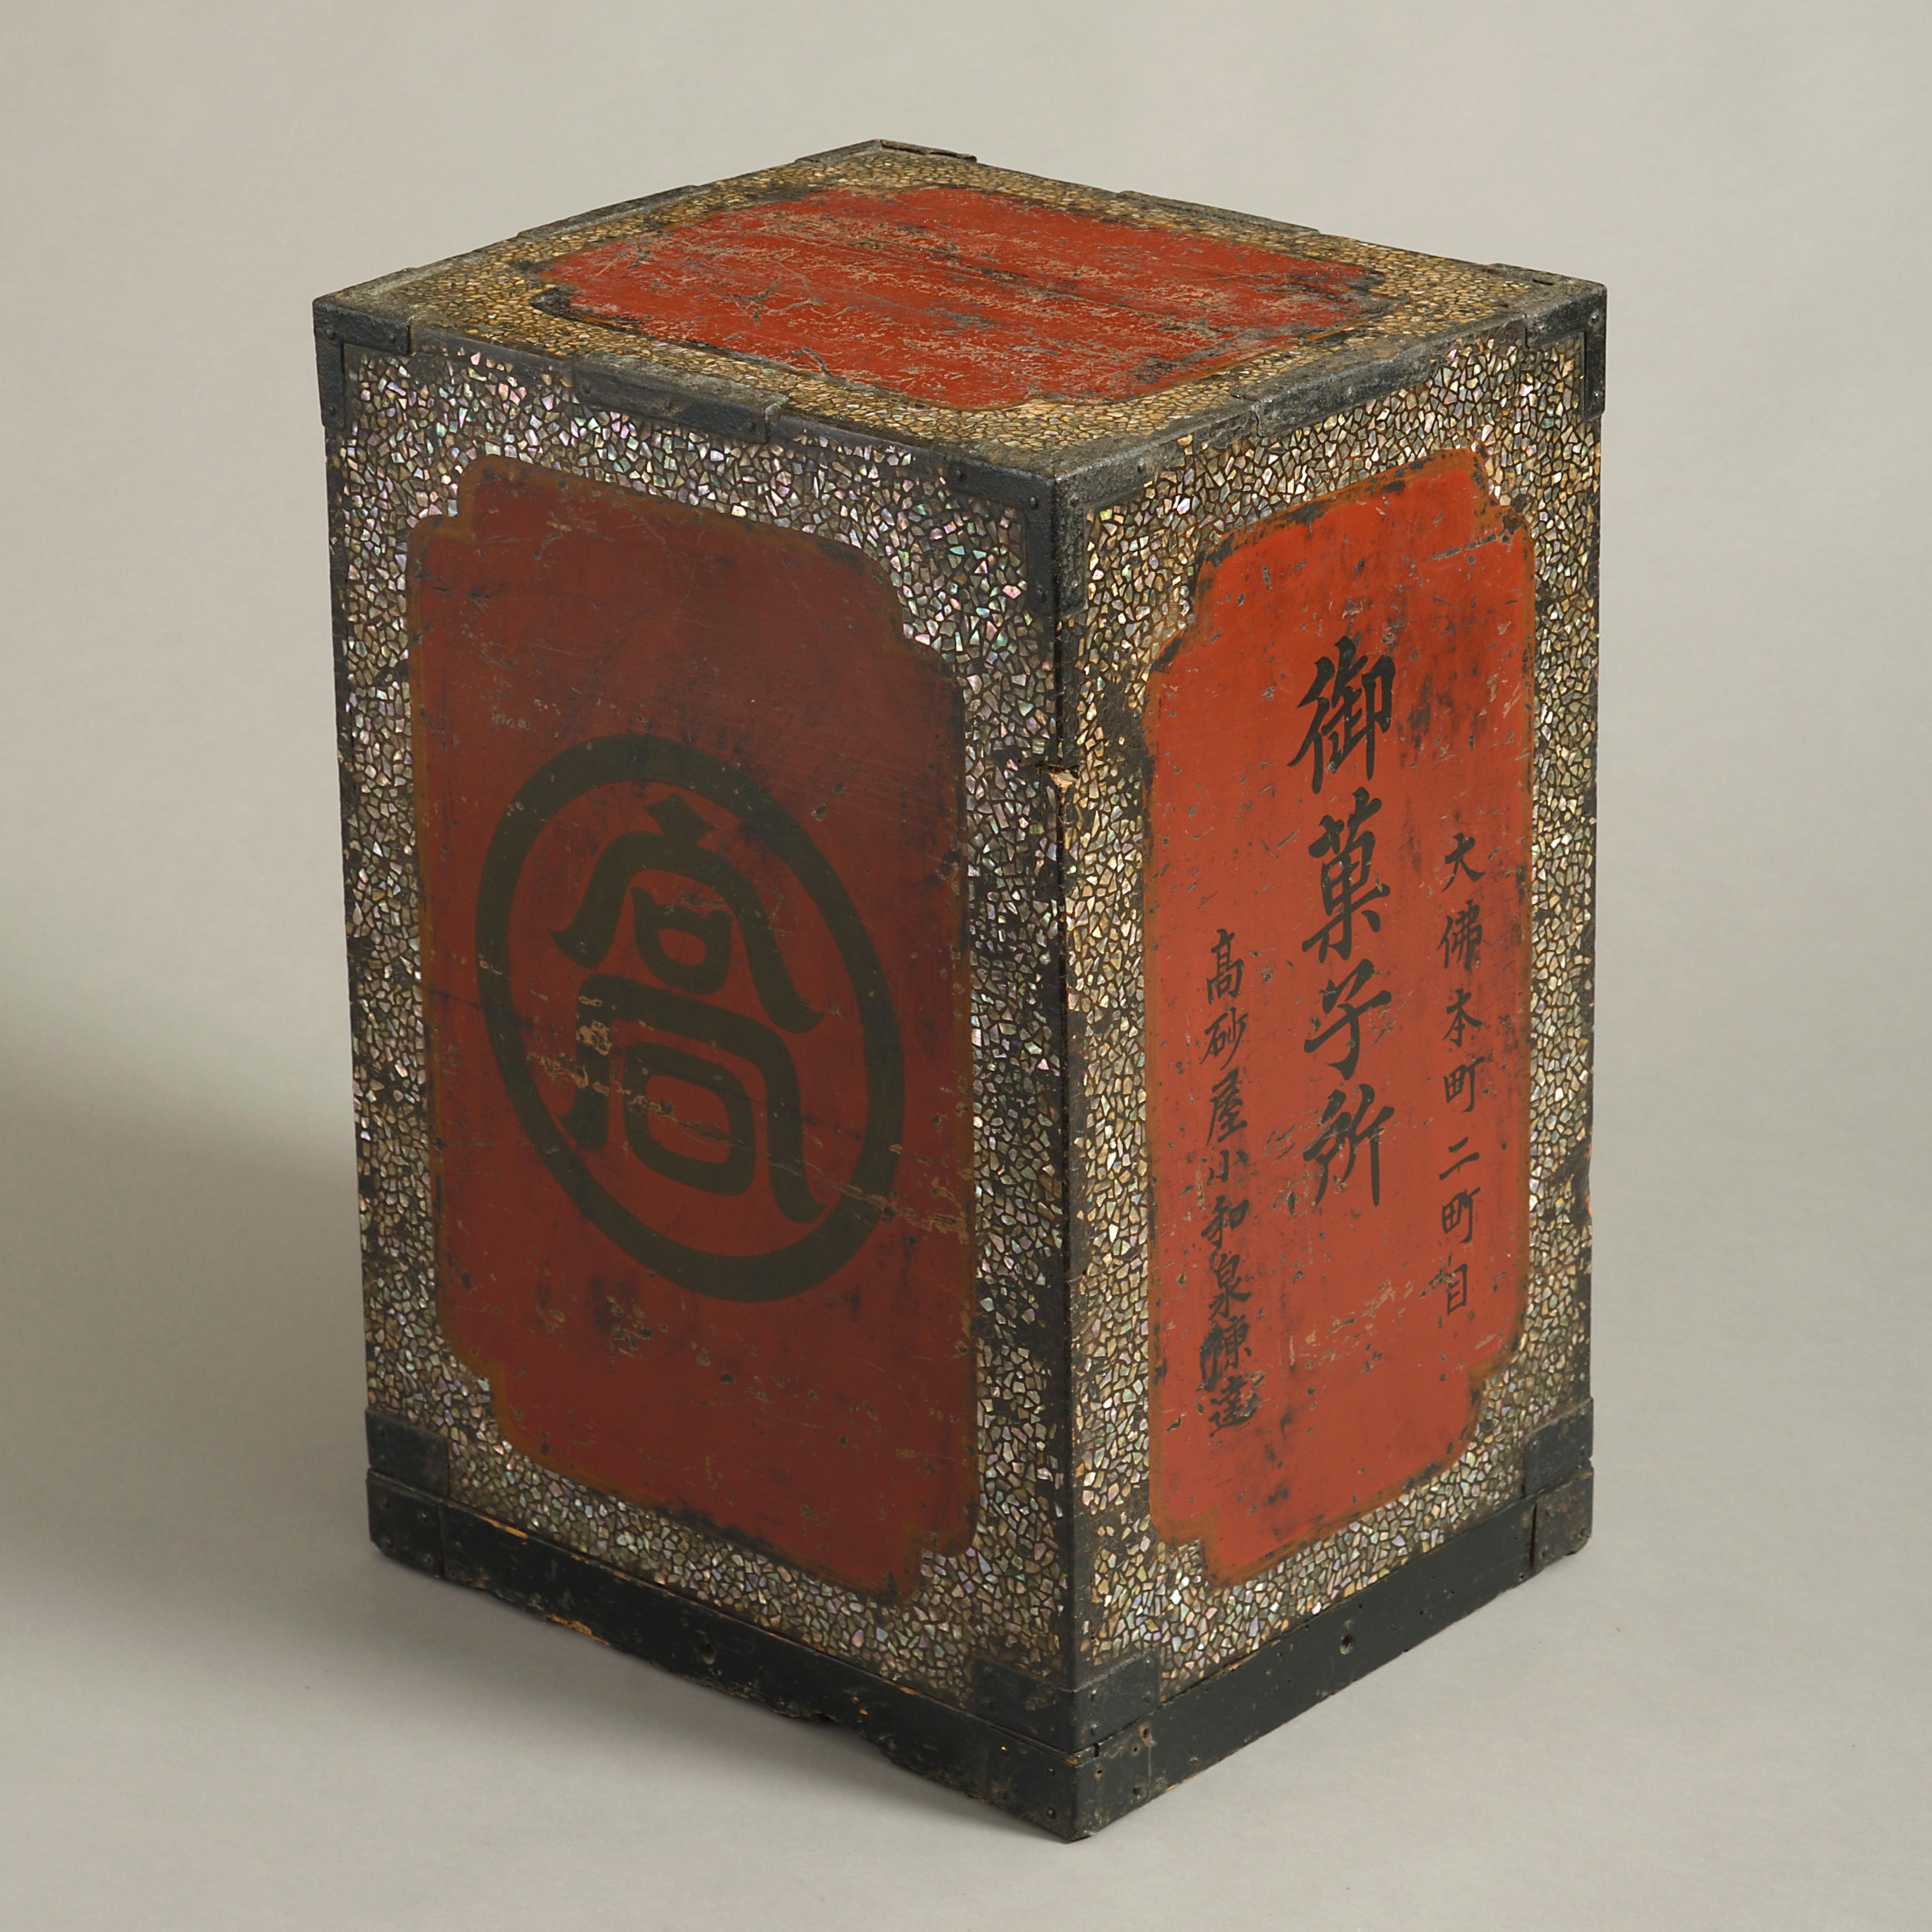 A fine 19th century lacquer armour box, of rectangular form, the sides decorated with black painted character marks and mother of pearl on a red ground.